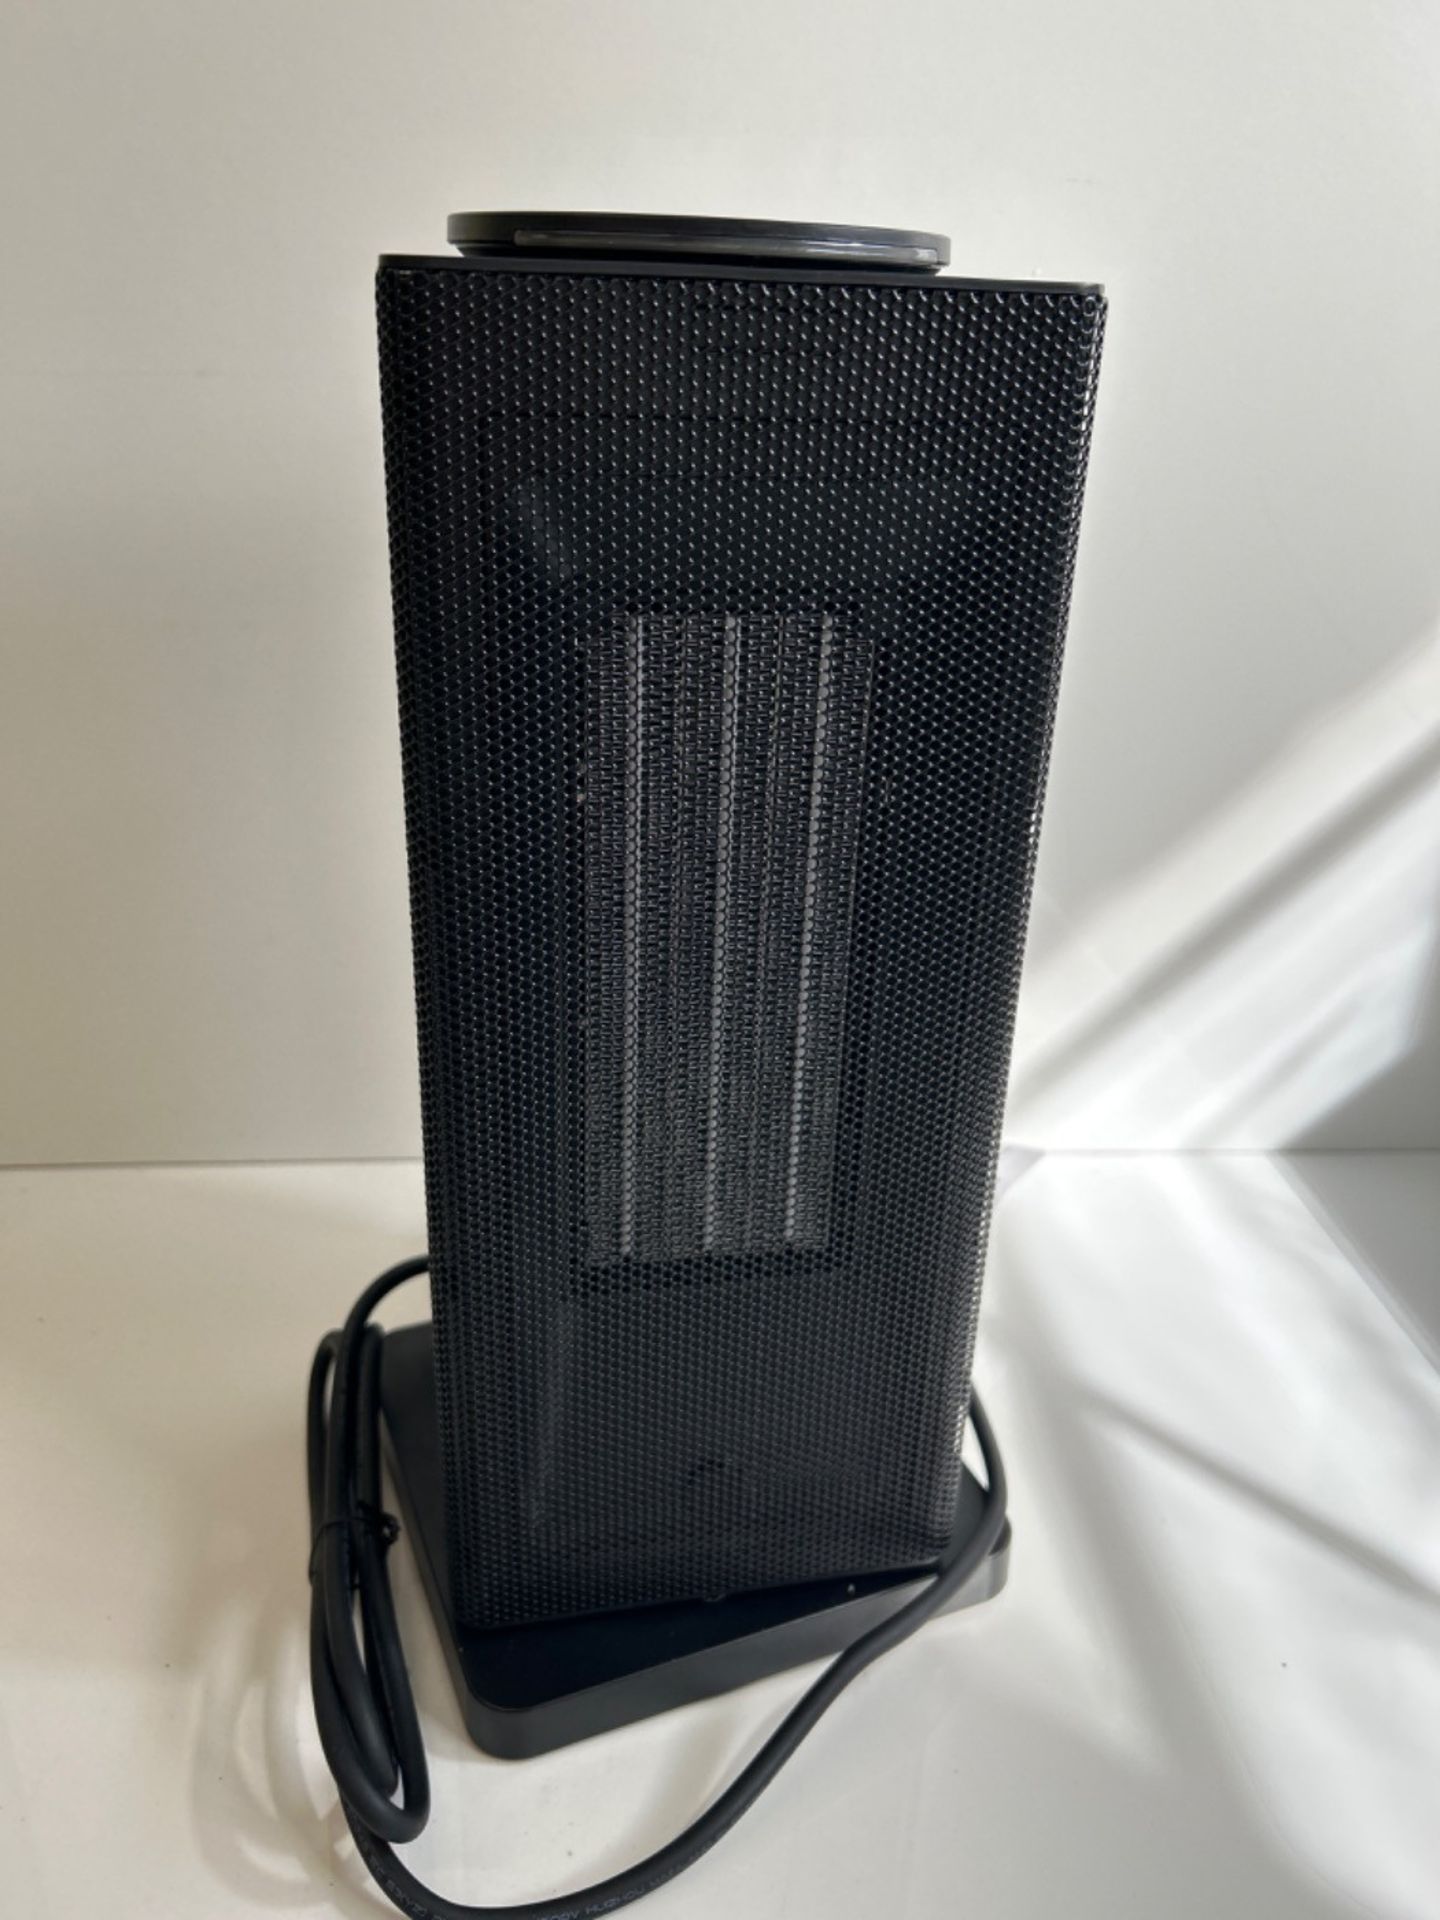 OMISOON Heater 2000W, ECO Electric Heater with 90°Oscillation, Thermostat, 24H Timer, Low Energy,  - Image 2 of 3